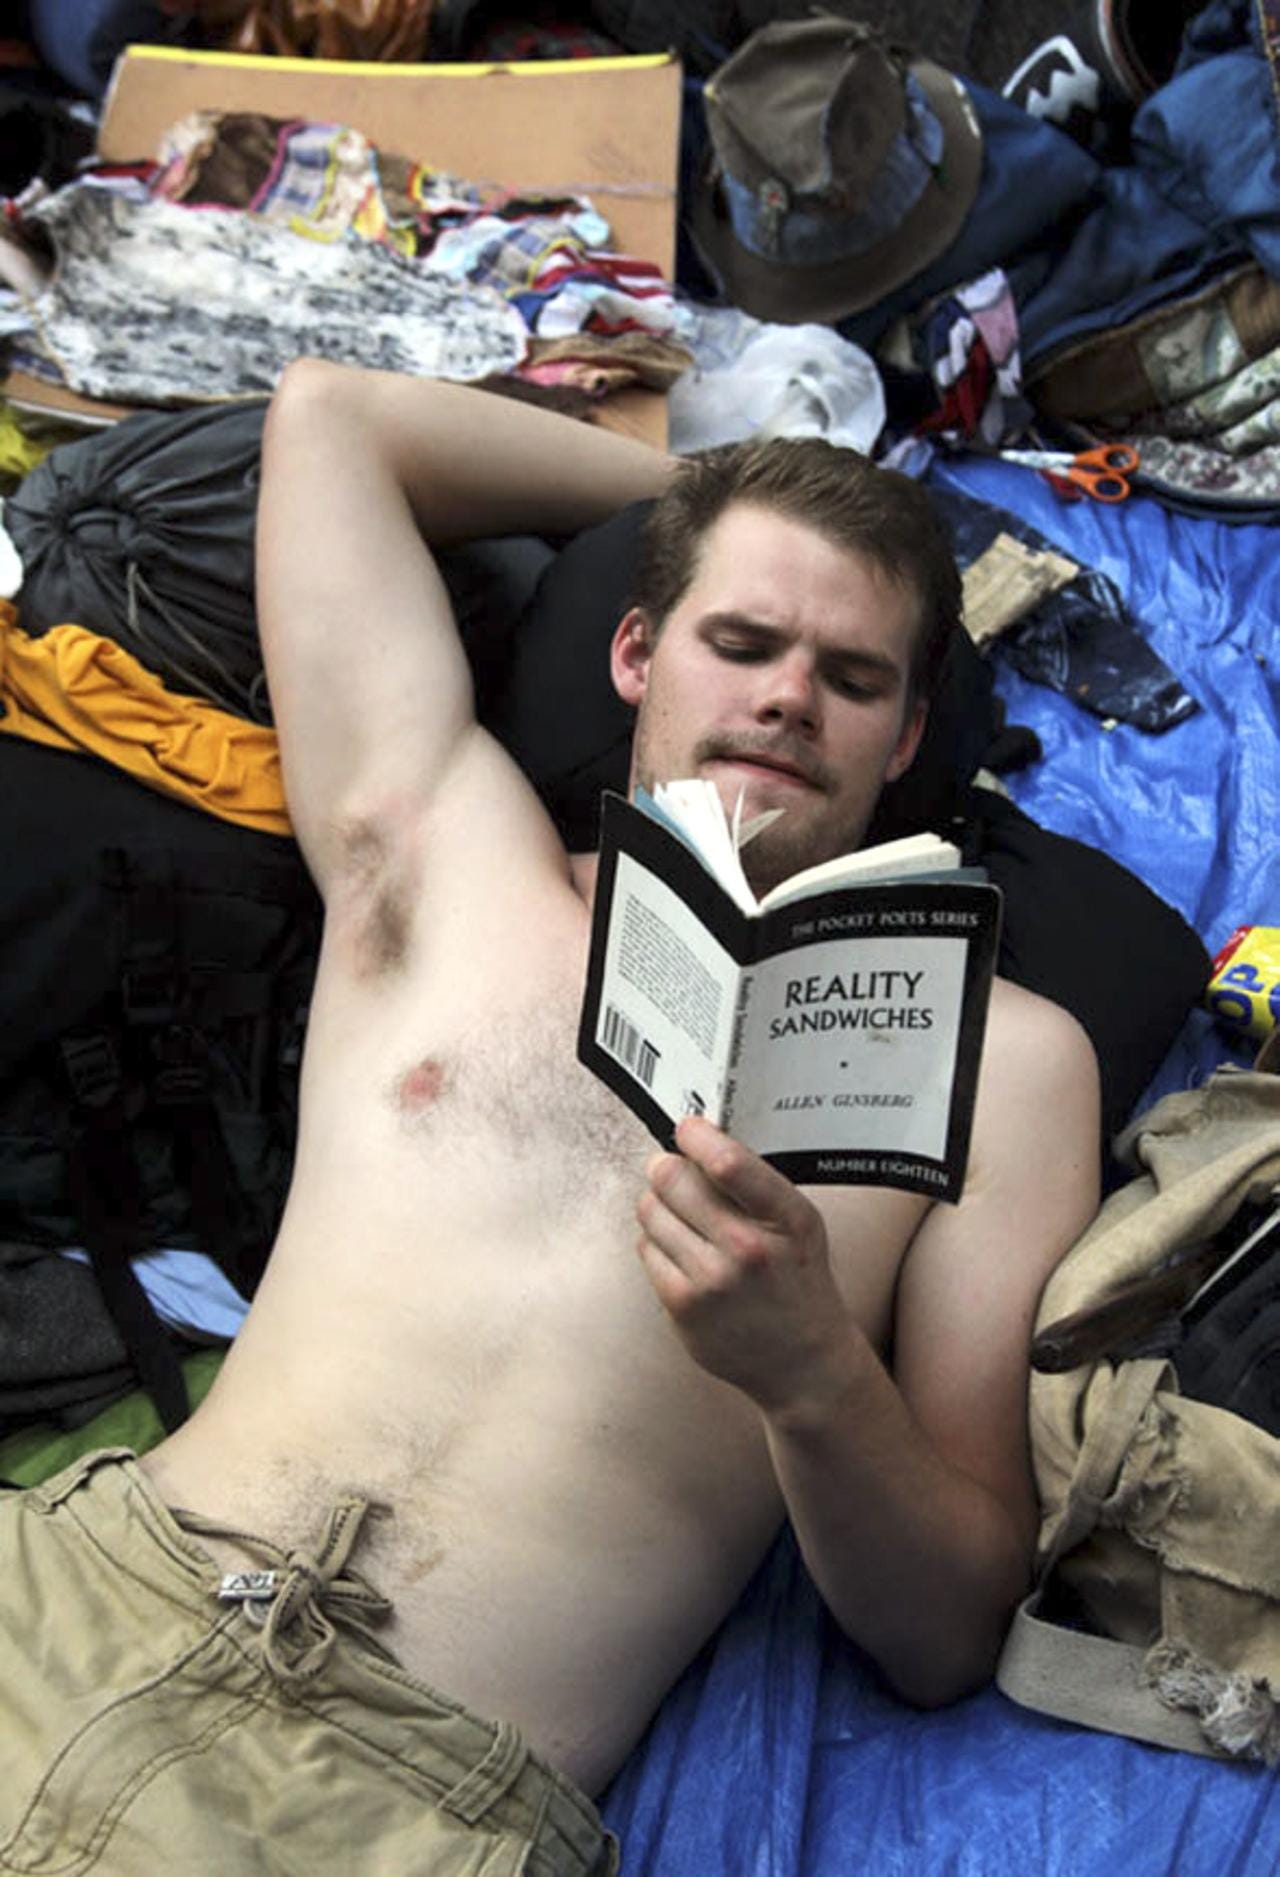 Dylan Spoelstra from Toronto, Ontario, reads Allen Ginsberg's "Reality Sandwiches" at  Zuccotti Park during Occupy Wall Street protests.